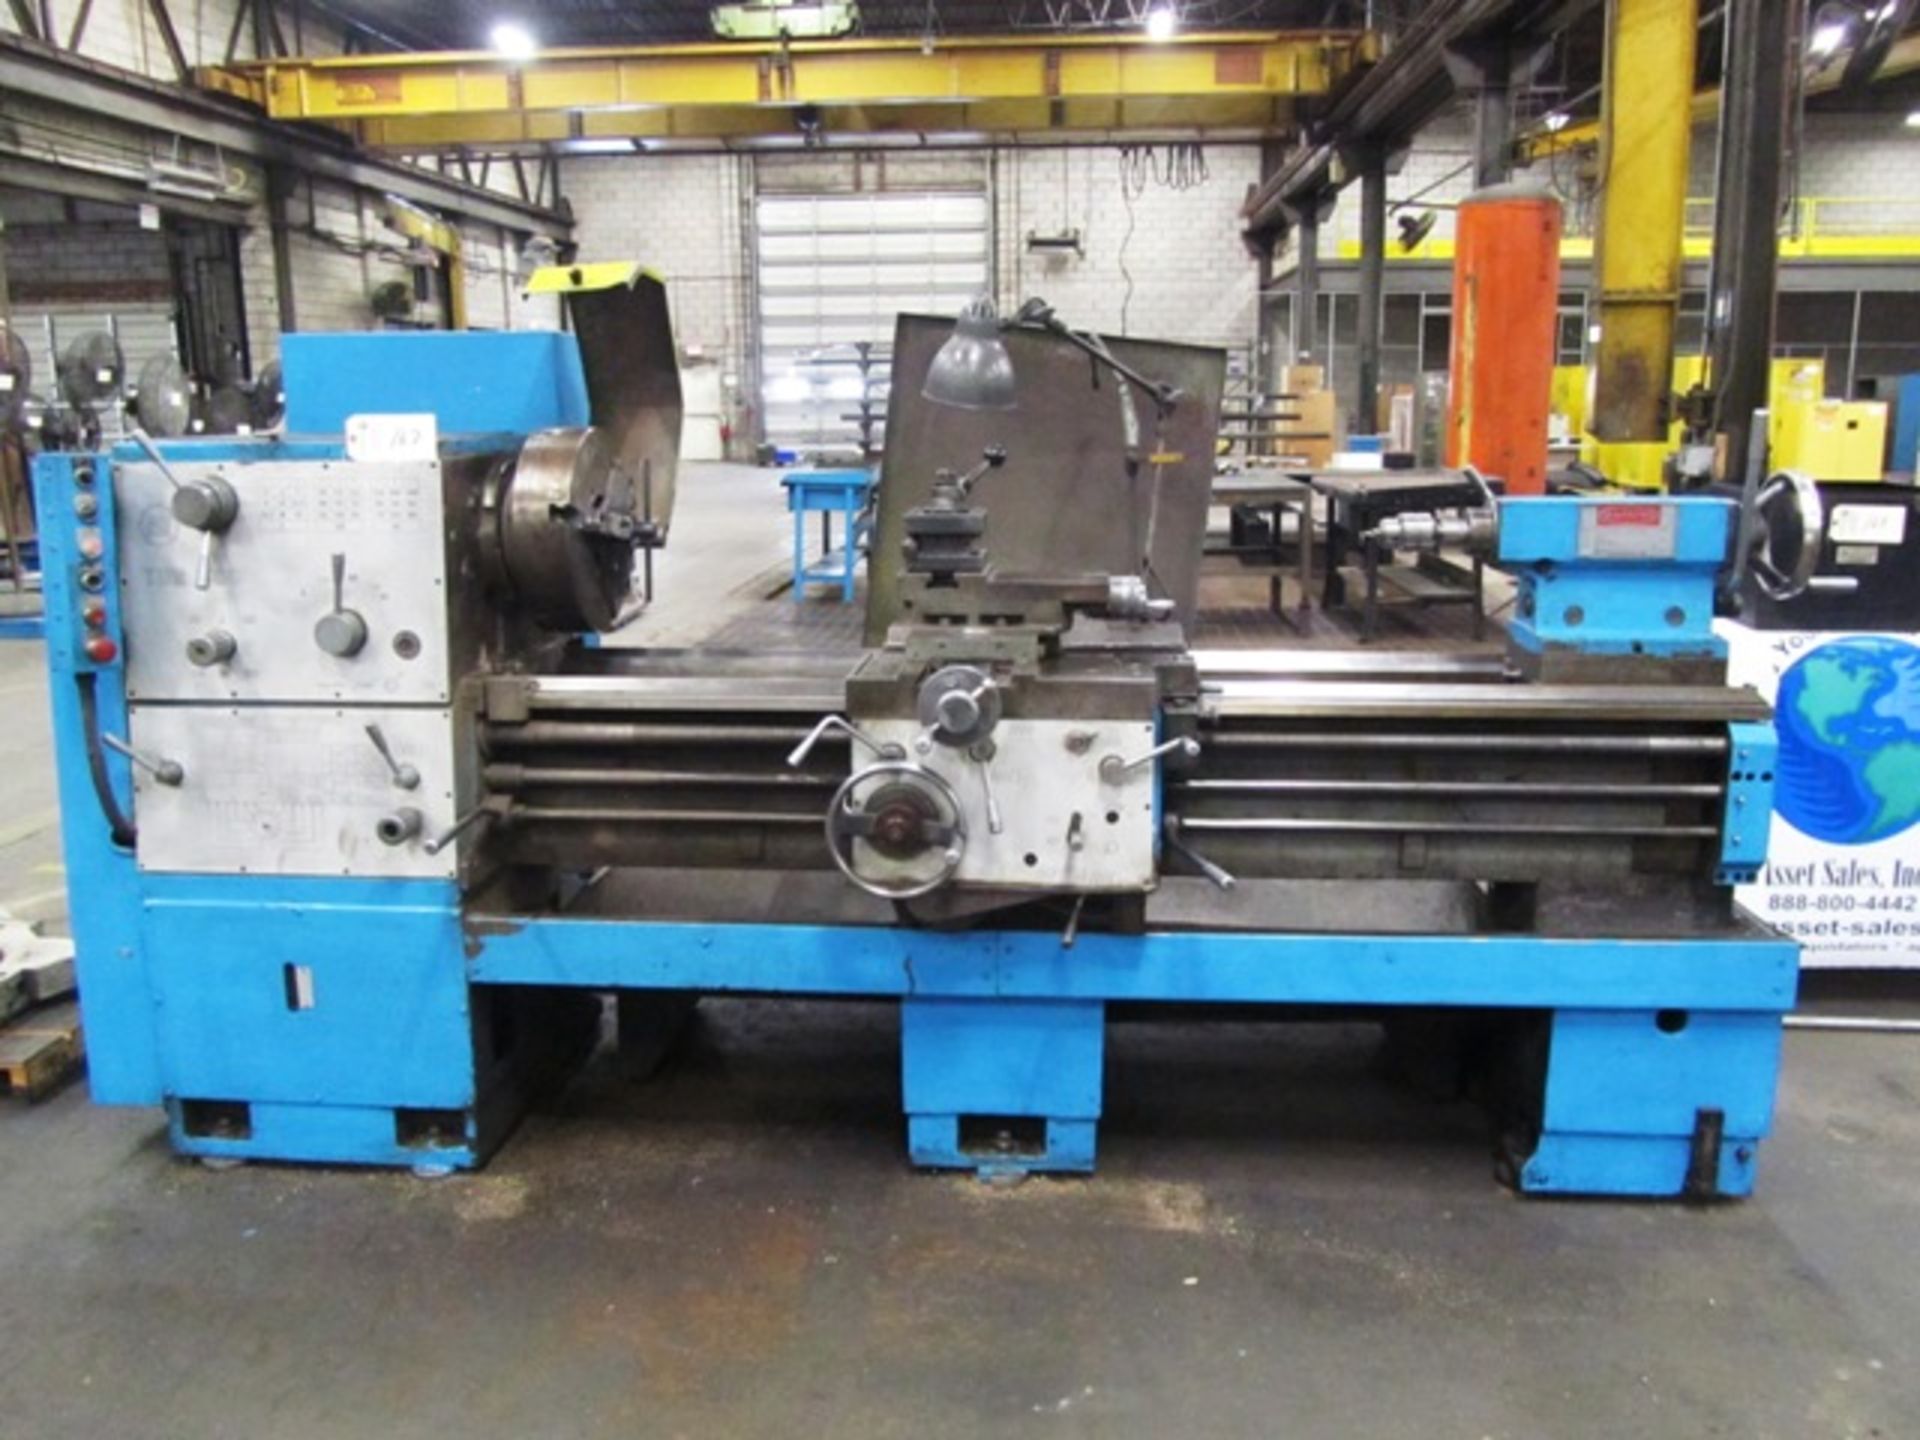 Toolmex Model TUR-560 22'' x 60'' Manual Lathe with Taper Attachment, 15'' 3-Jaw Chuck, Tailstock,